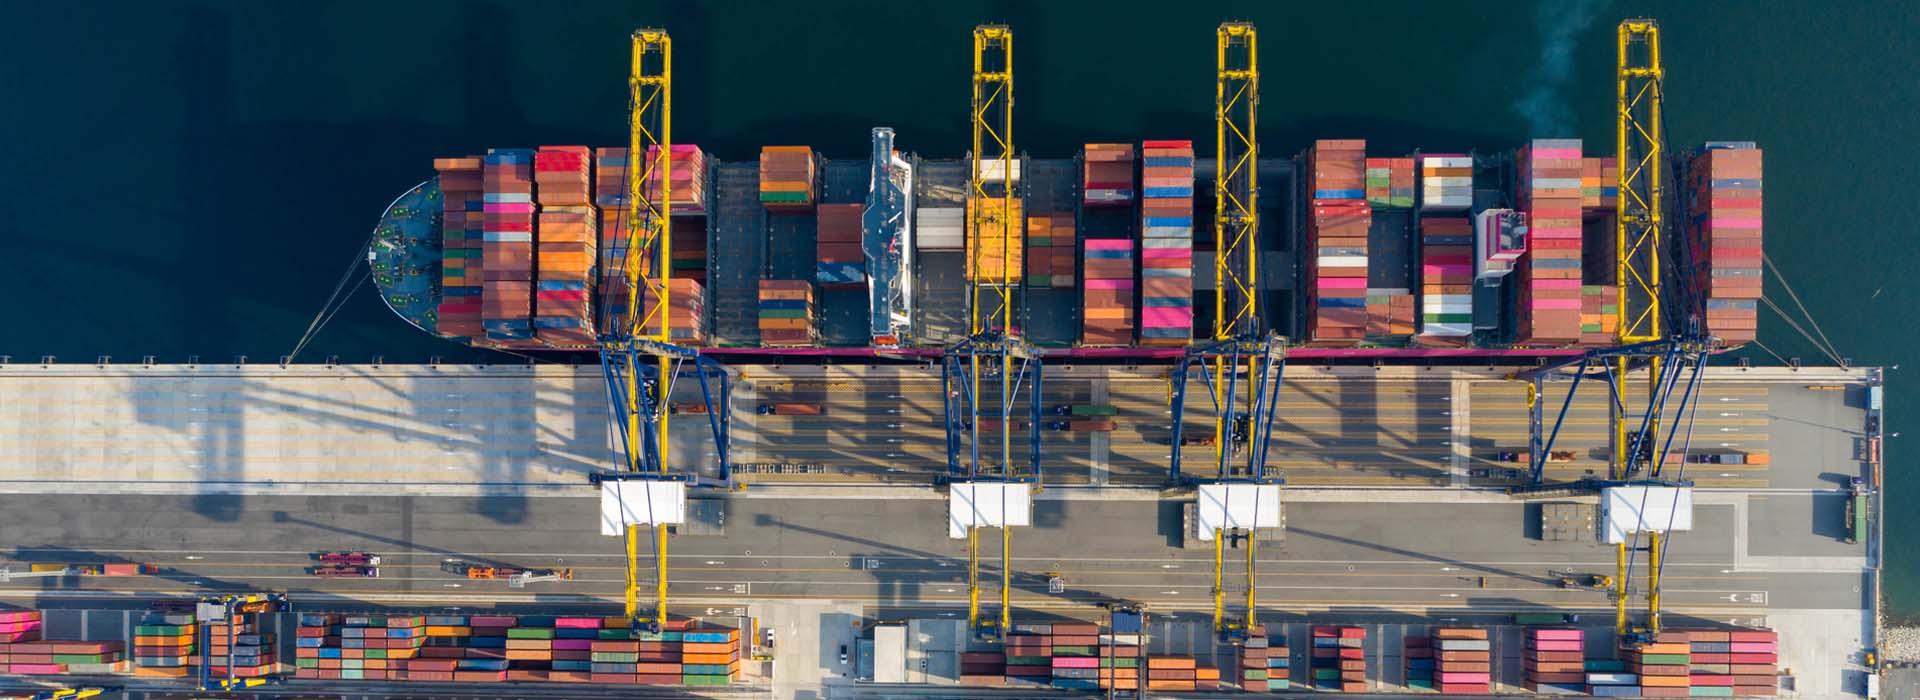 Photo of a container ship in the harbour, photographed from above